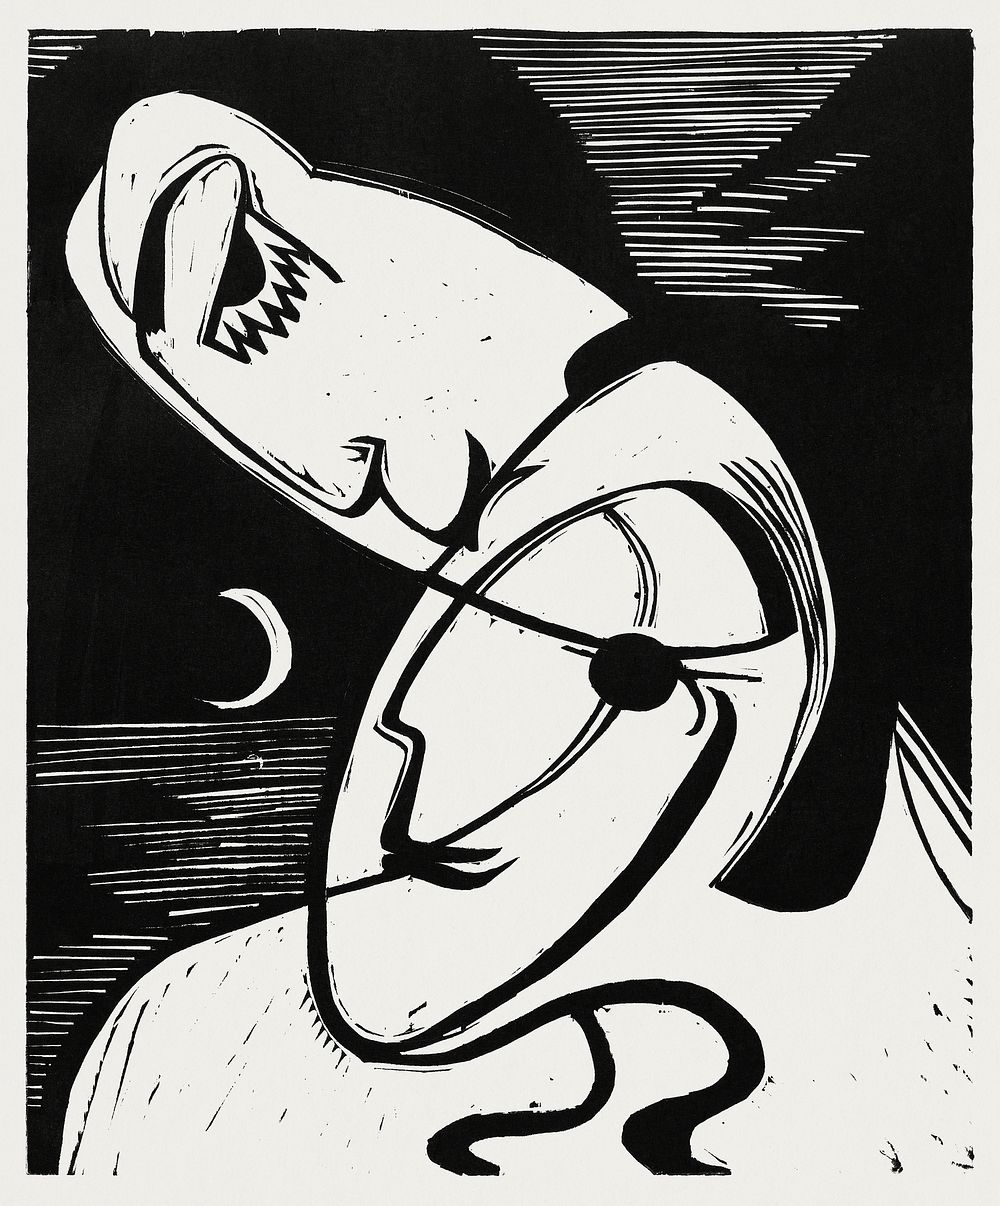 The Kiss (1930) print in high resolution by Ernst Ludwig Kirchner. Original from The National Gallery of Art. Digitally…